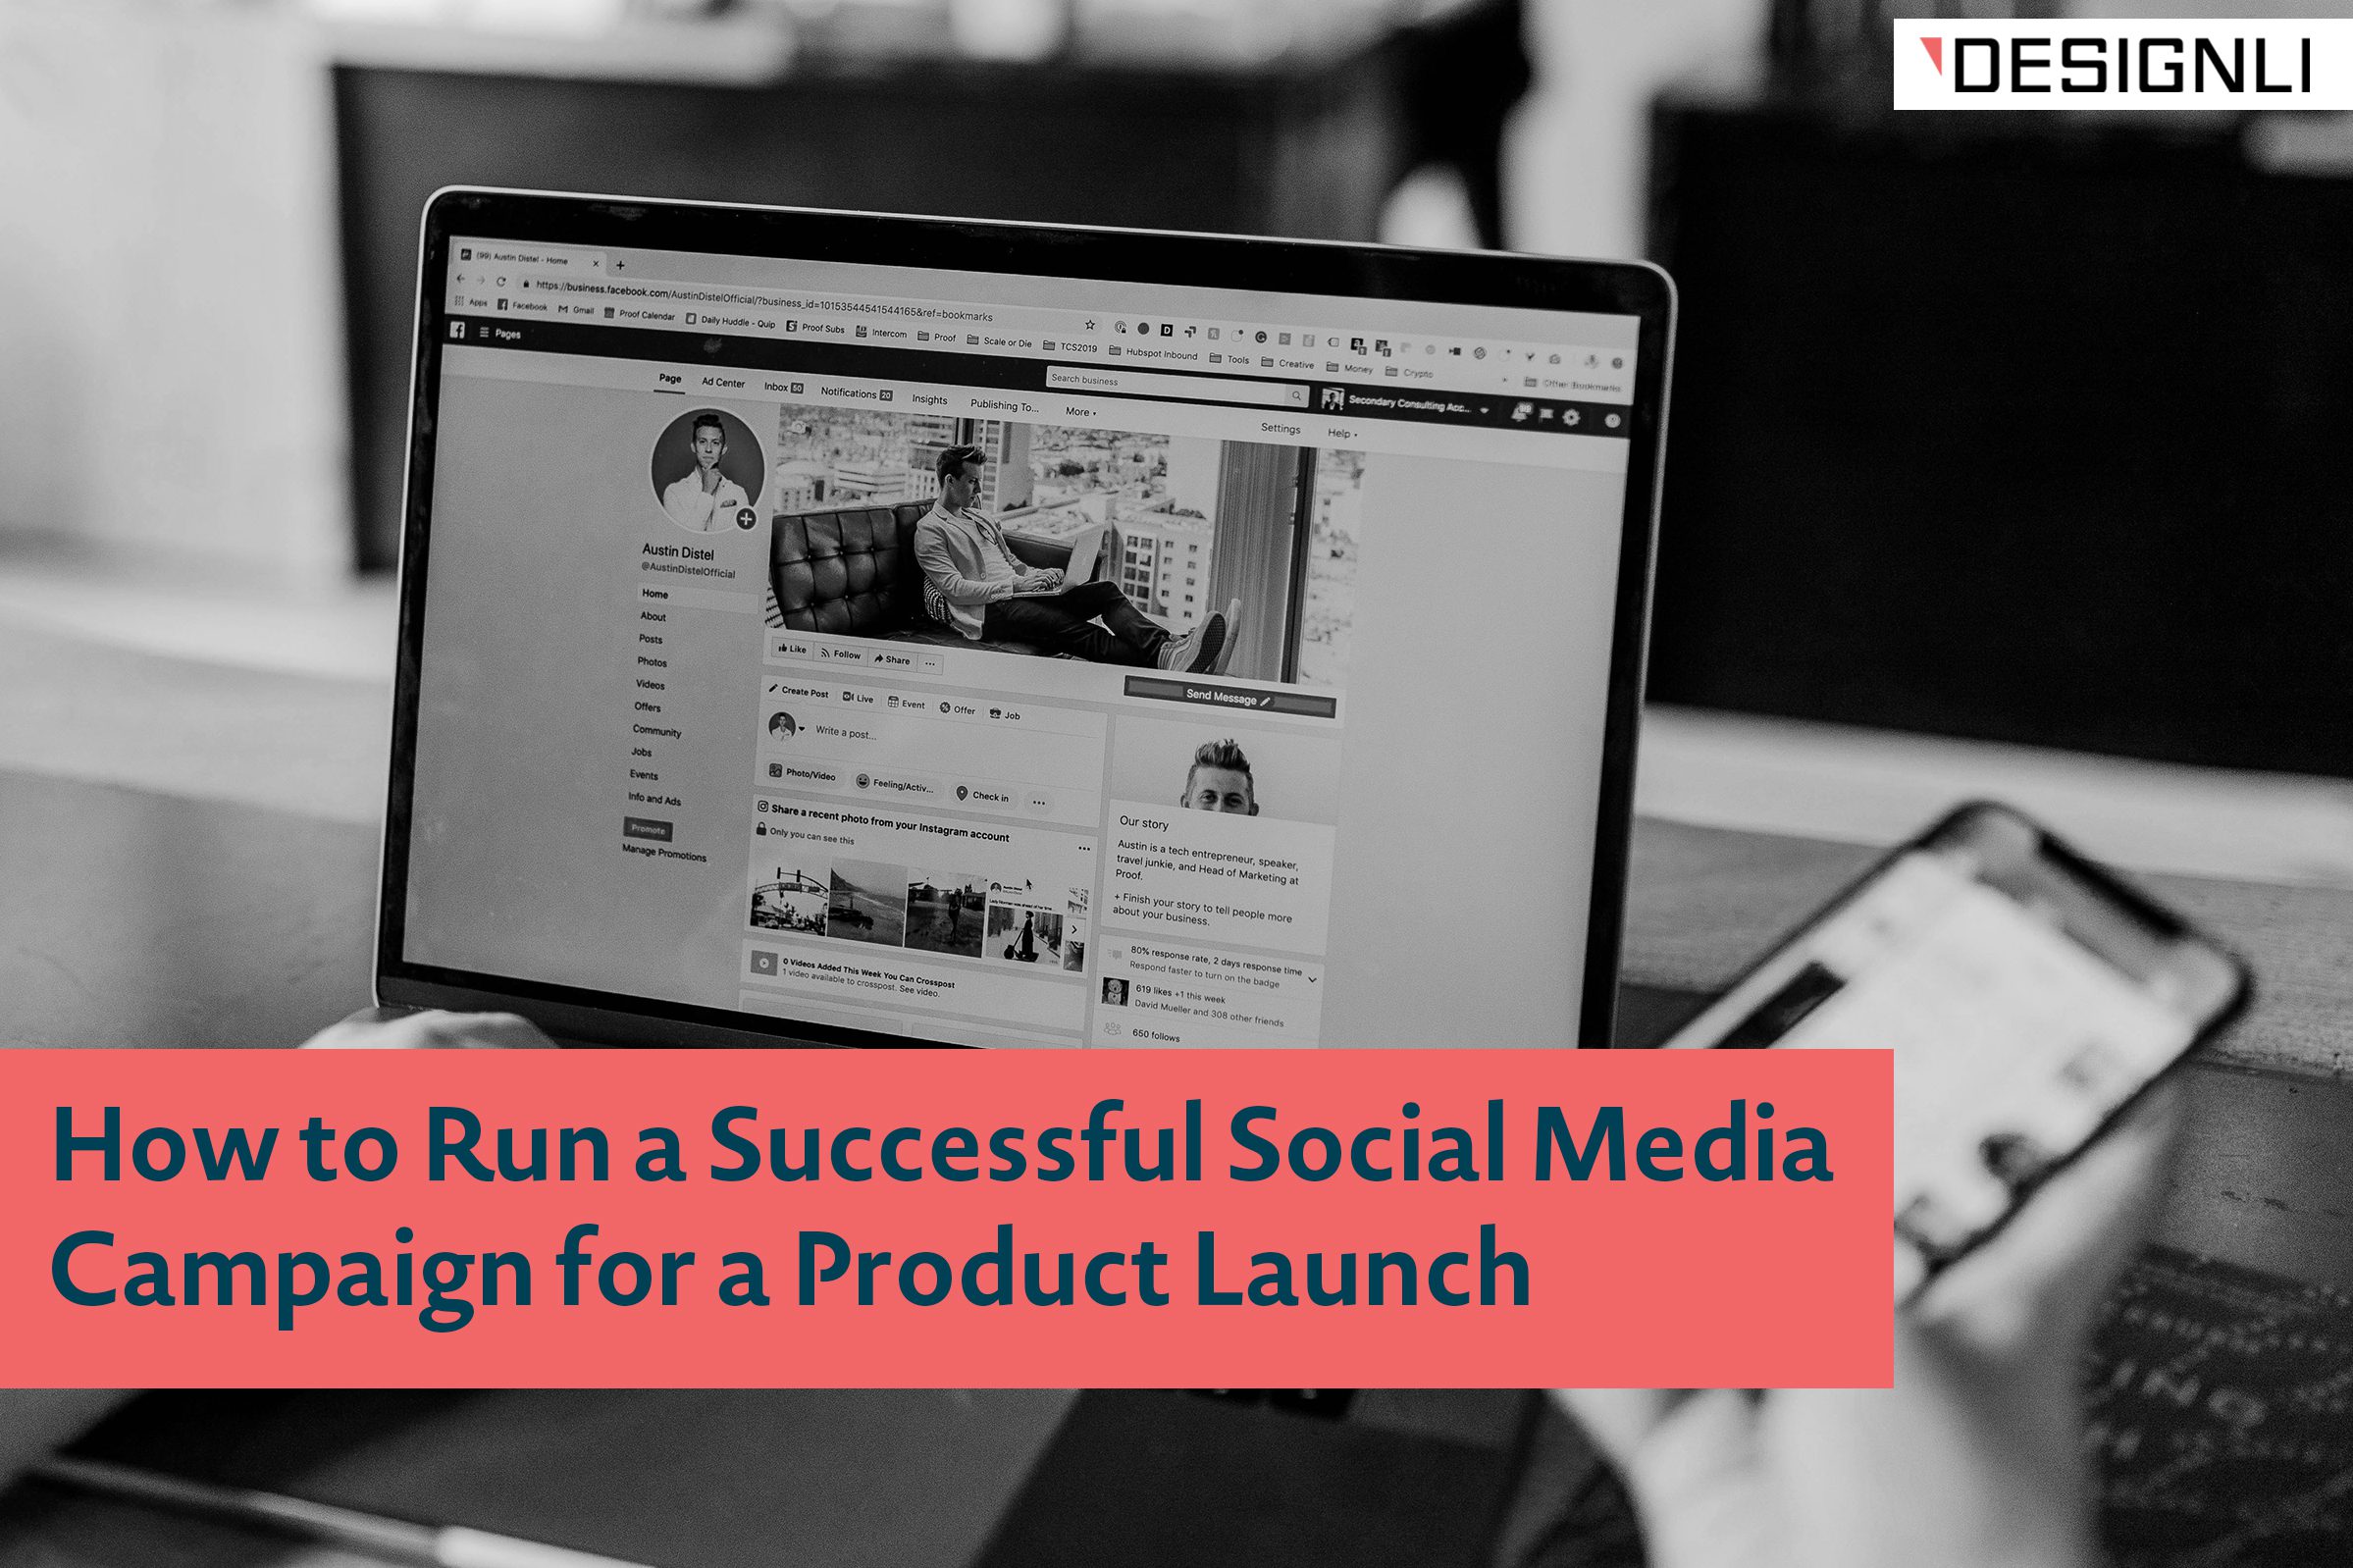 How to Run a Successful Social Media Campaign for a Product Launch